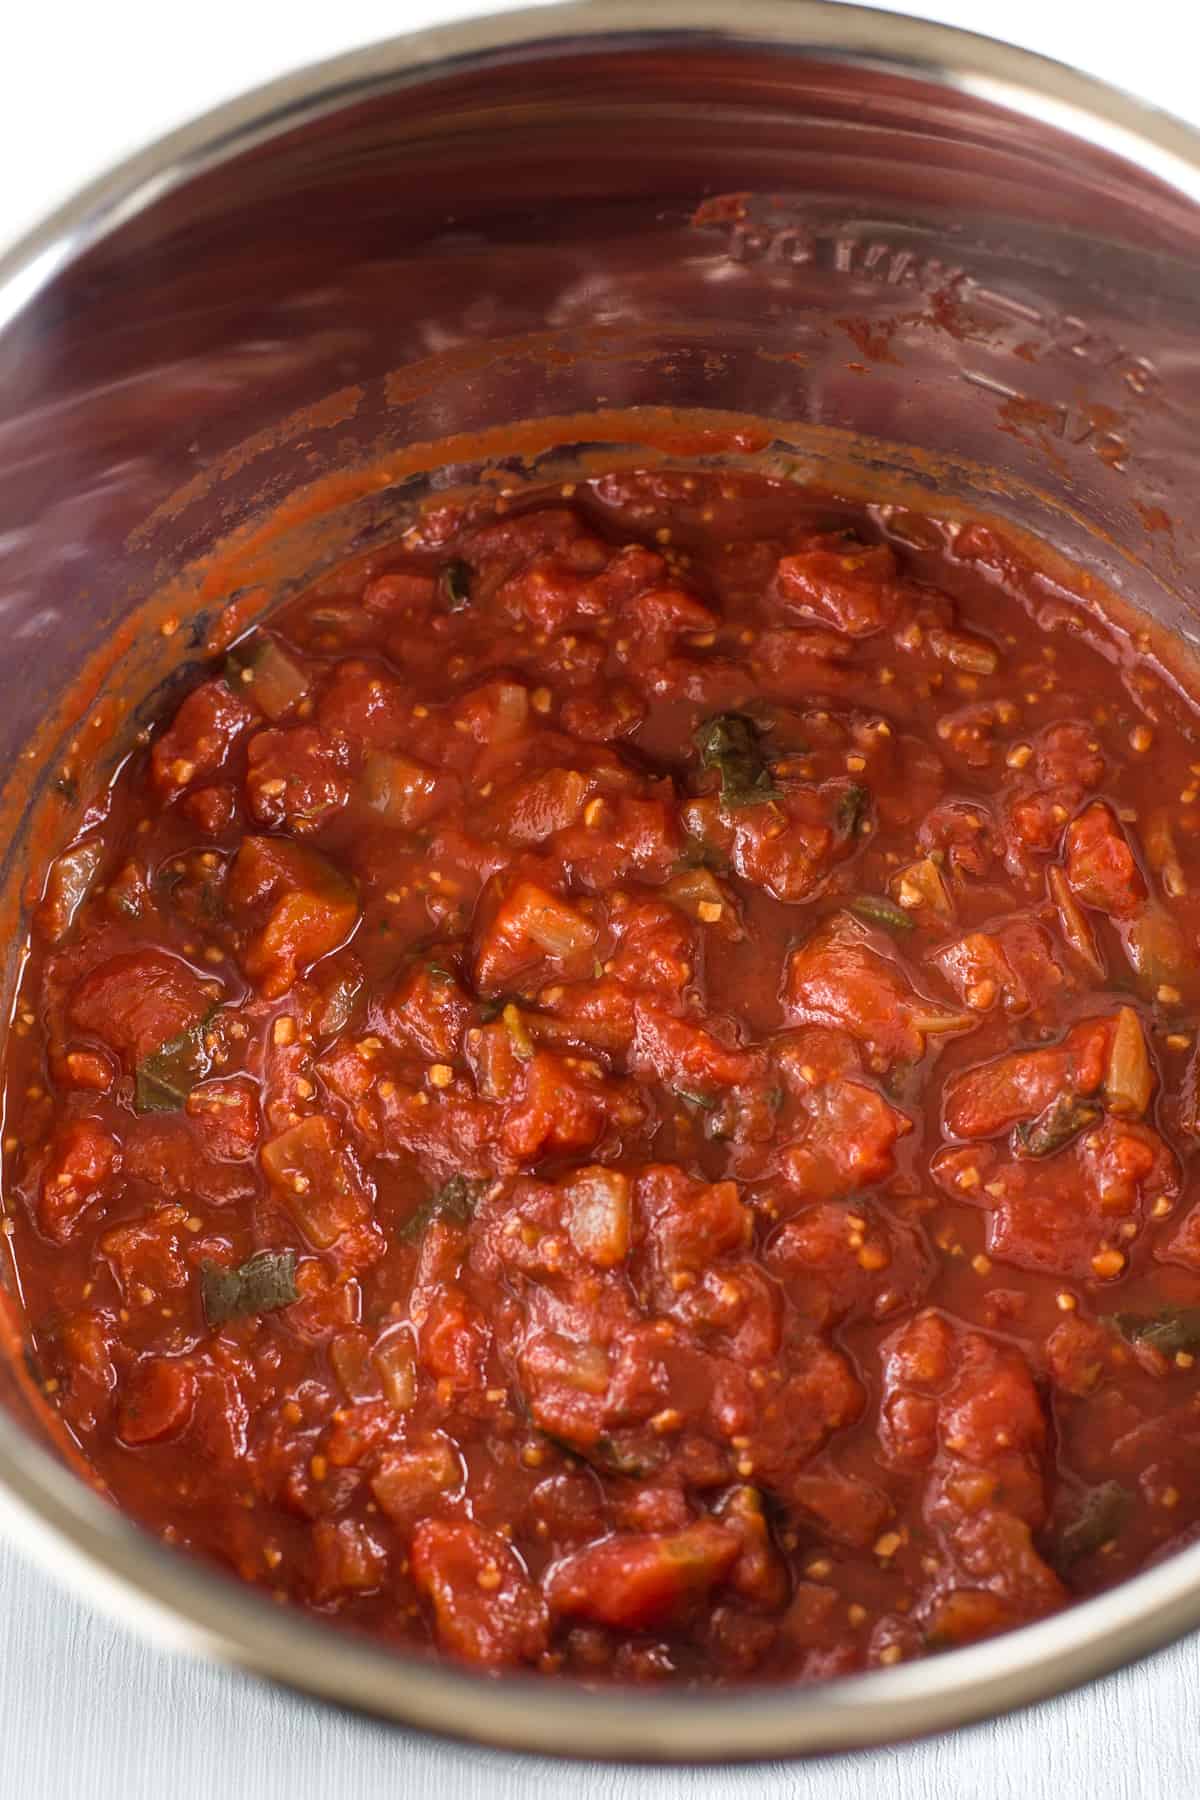 Chunky slow cooker tomato sauce in the pot.